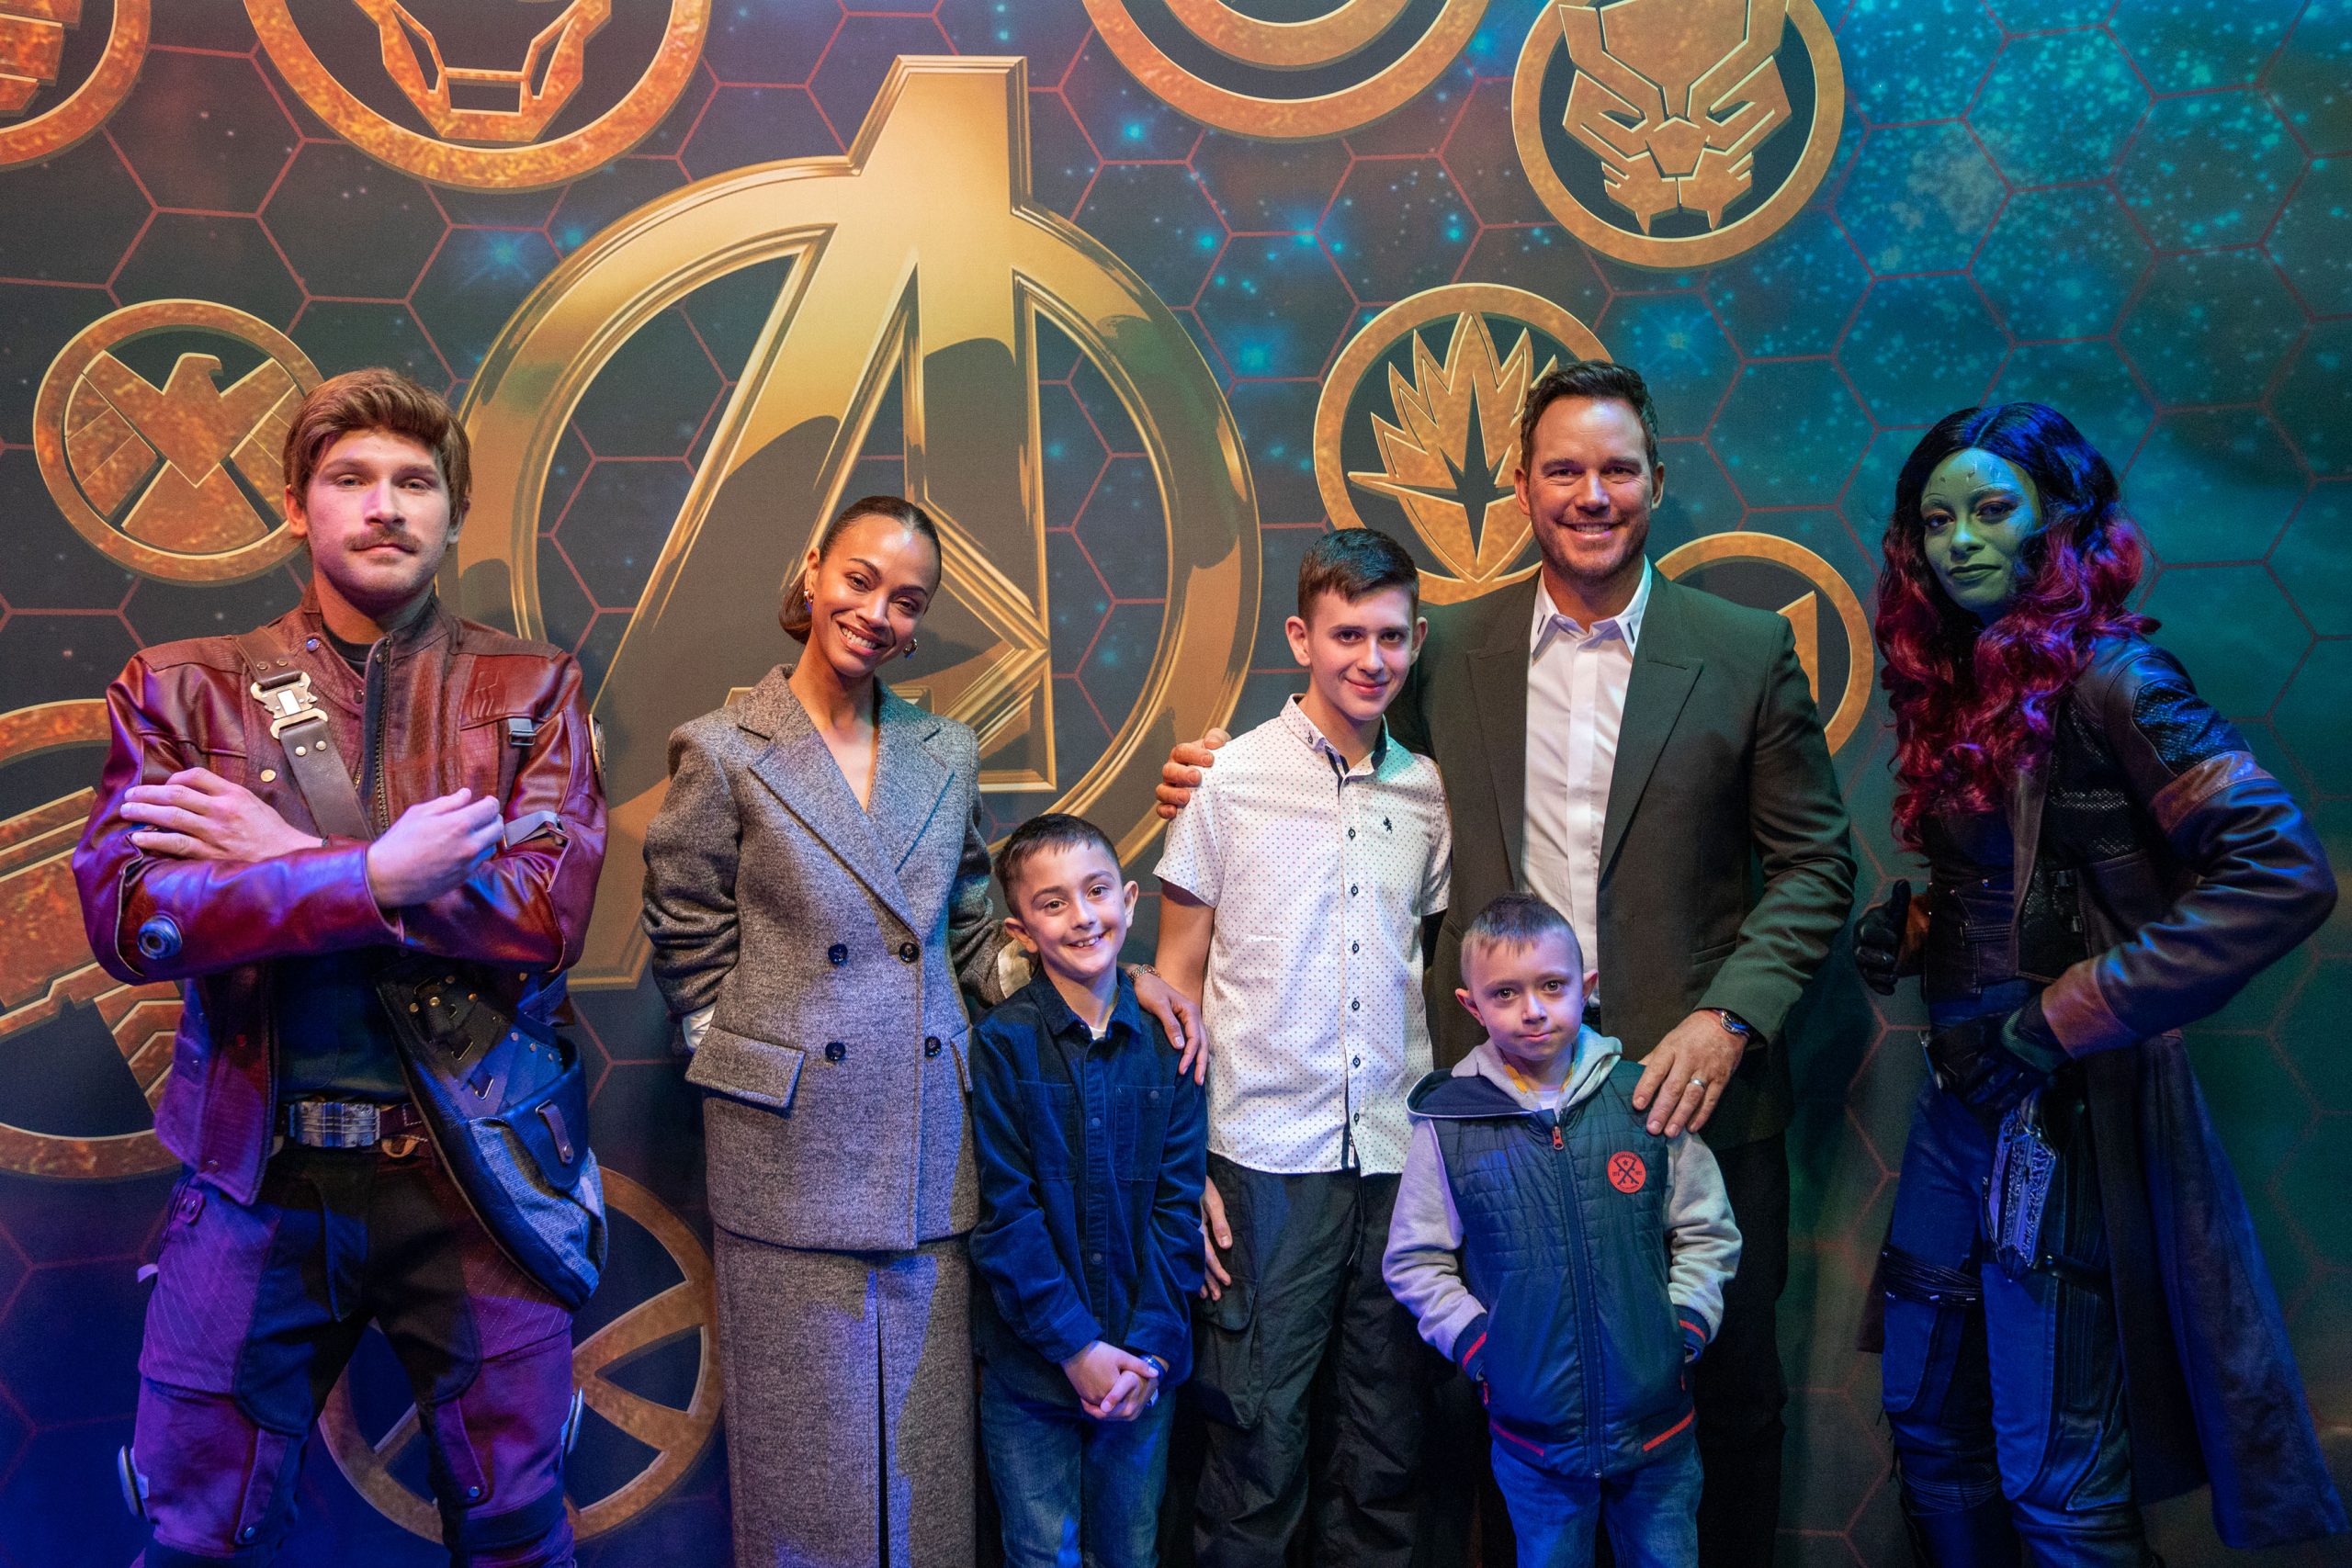 A magical weekend for Make-A-Wish kids at the European Gala Event of Guardians of the Galaxy, vol.3